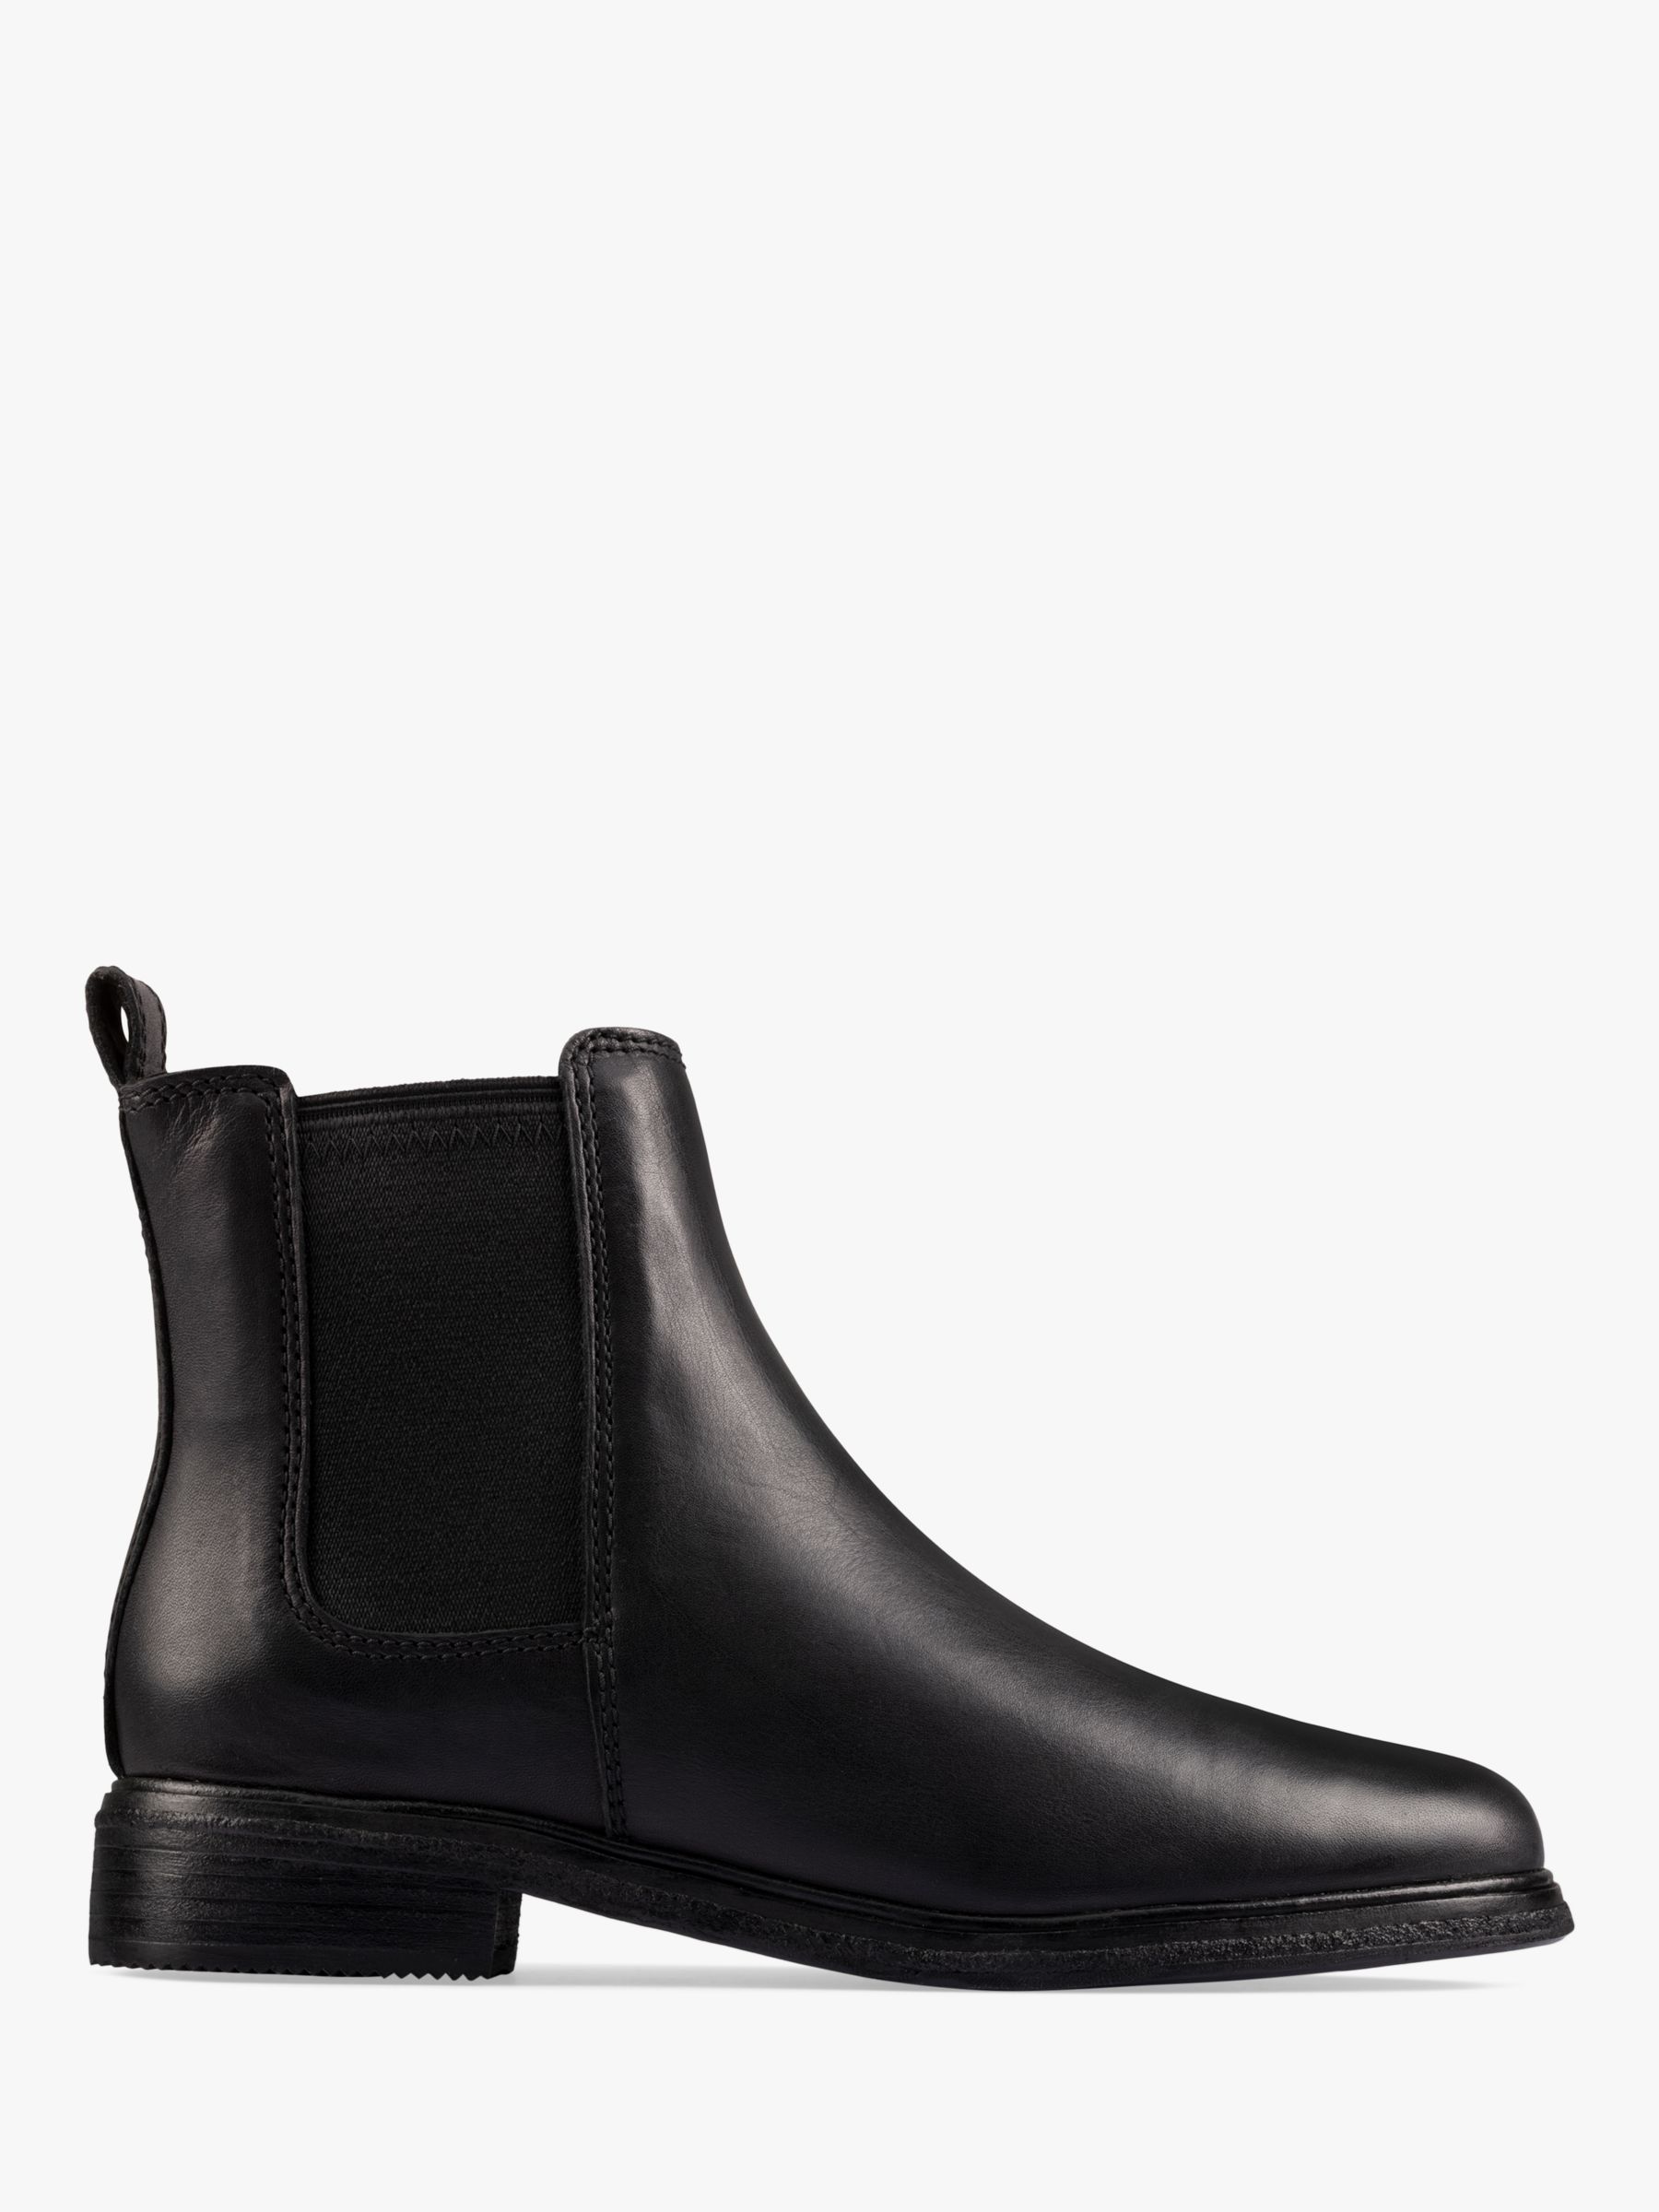 Clarkdale Chelsea Boots, Black at Lewis &